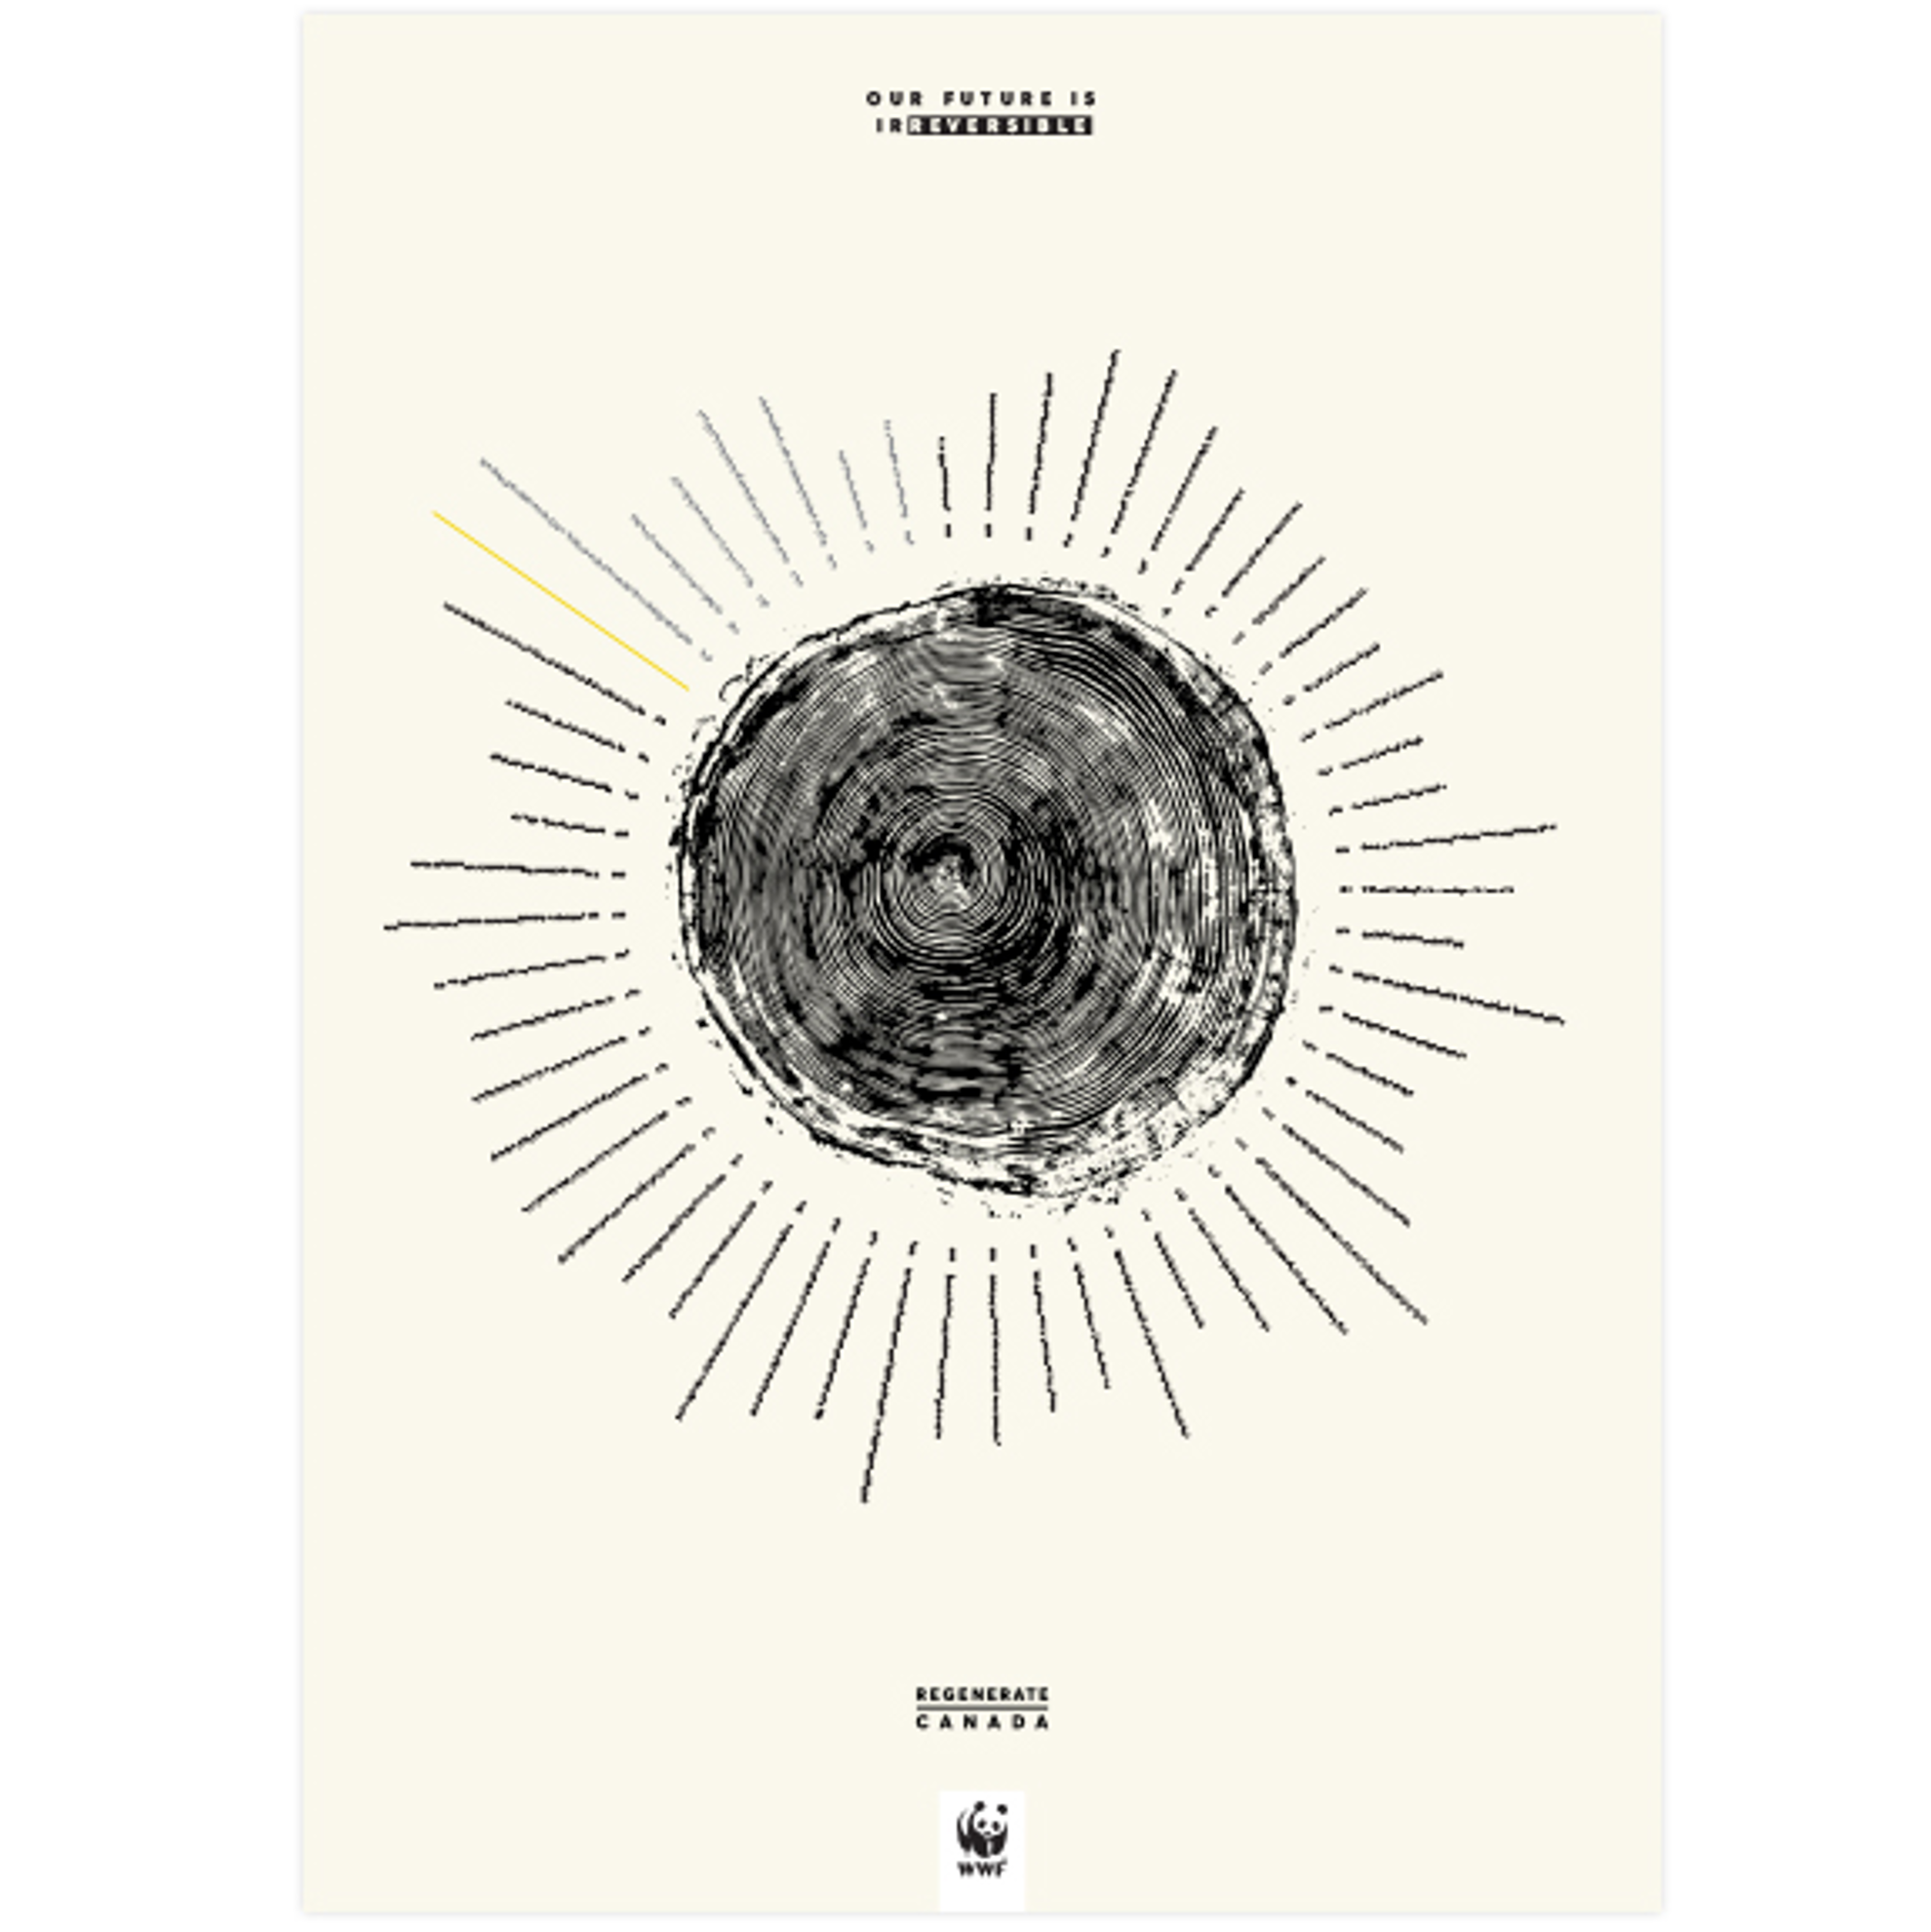 Regenerate Canada Poster featuring a tree ring design